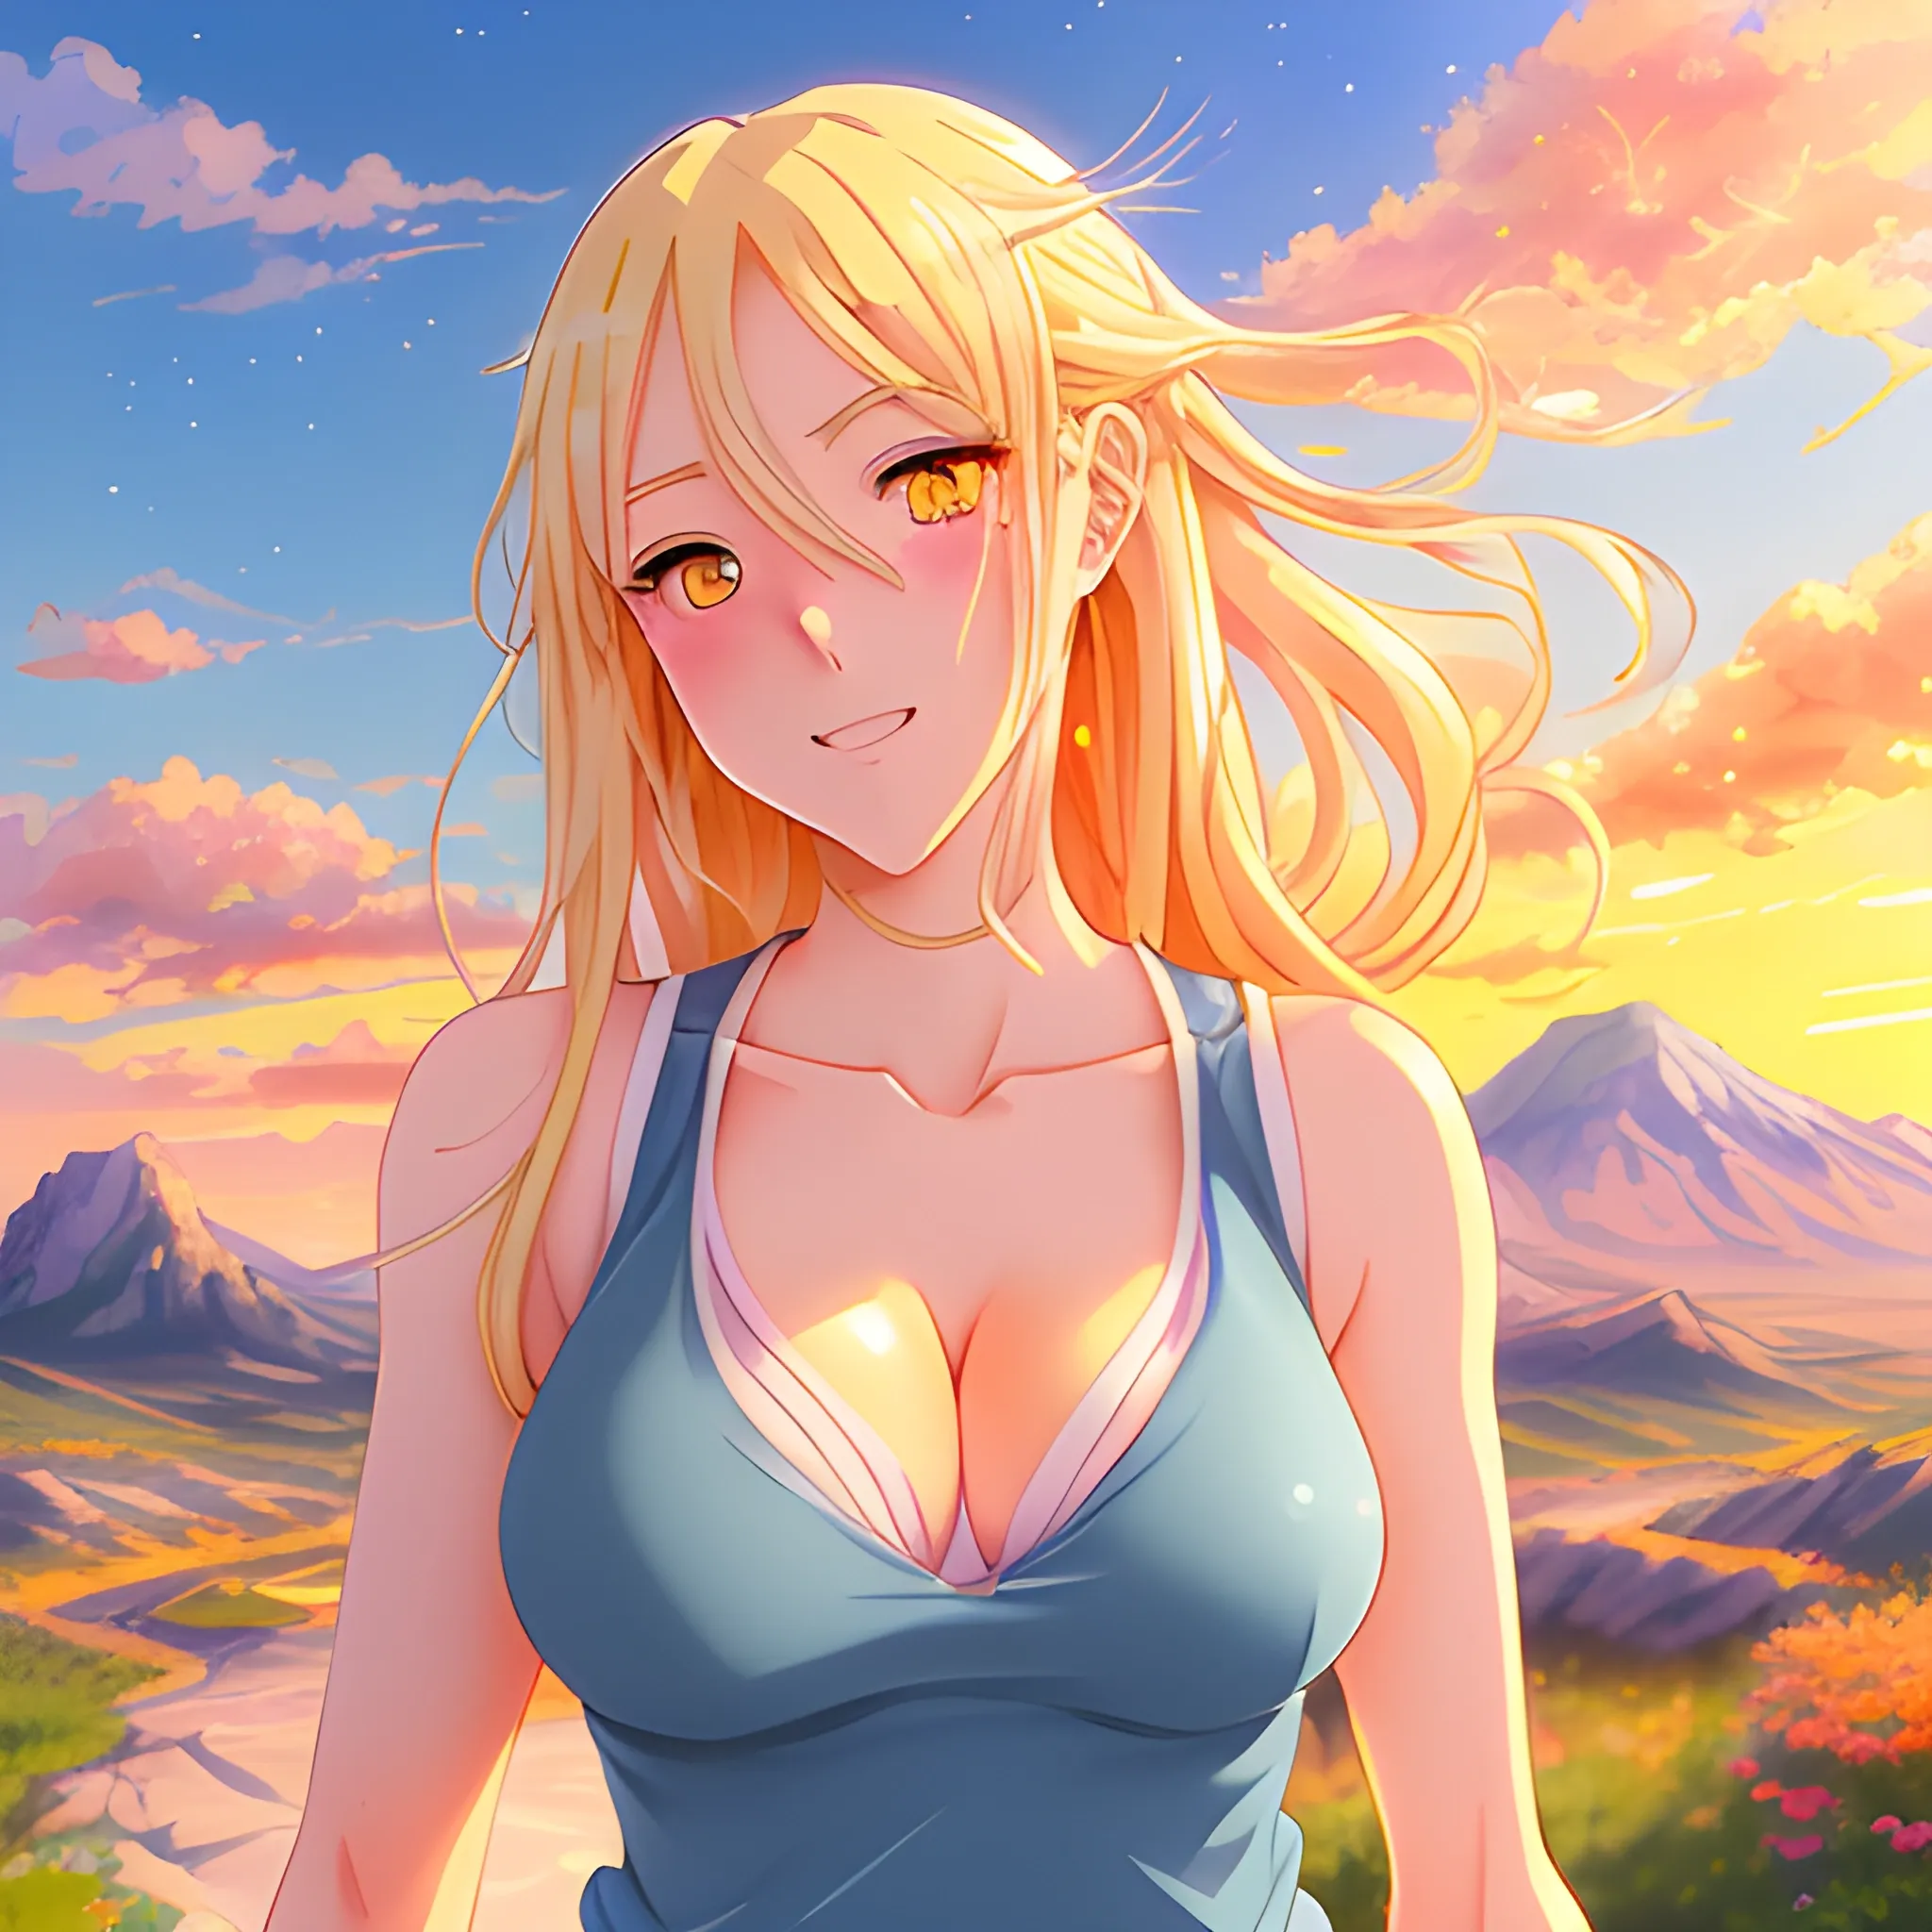 Anime art, cute flat young girl, semi-long blond hair in motion, rosy cheeks, tender face, big watery blue eyes, looks sad face, wearing a tank top not revealing, magical and luminous aura around herself, light cinematographic, volumetric light, highly detailed, magic fantasy orange sky in background with sunset, stars and rocky mountains in beginning of dusk, digital painting, 

size: 3048x3048